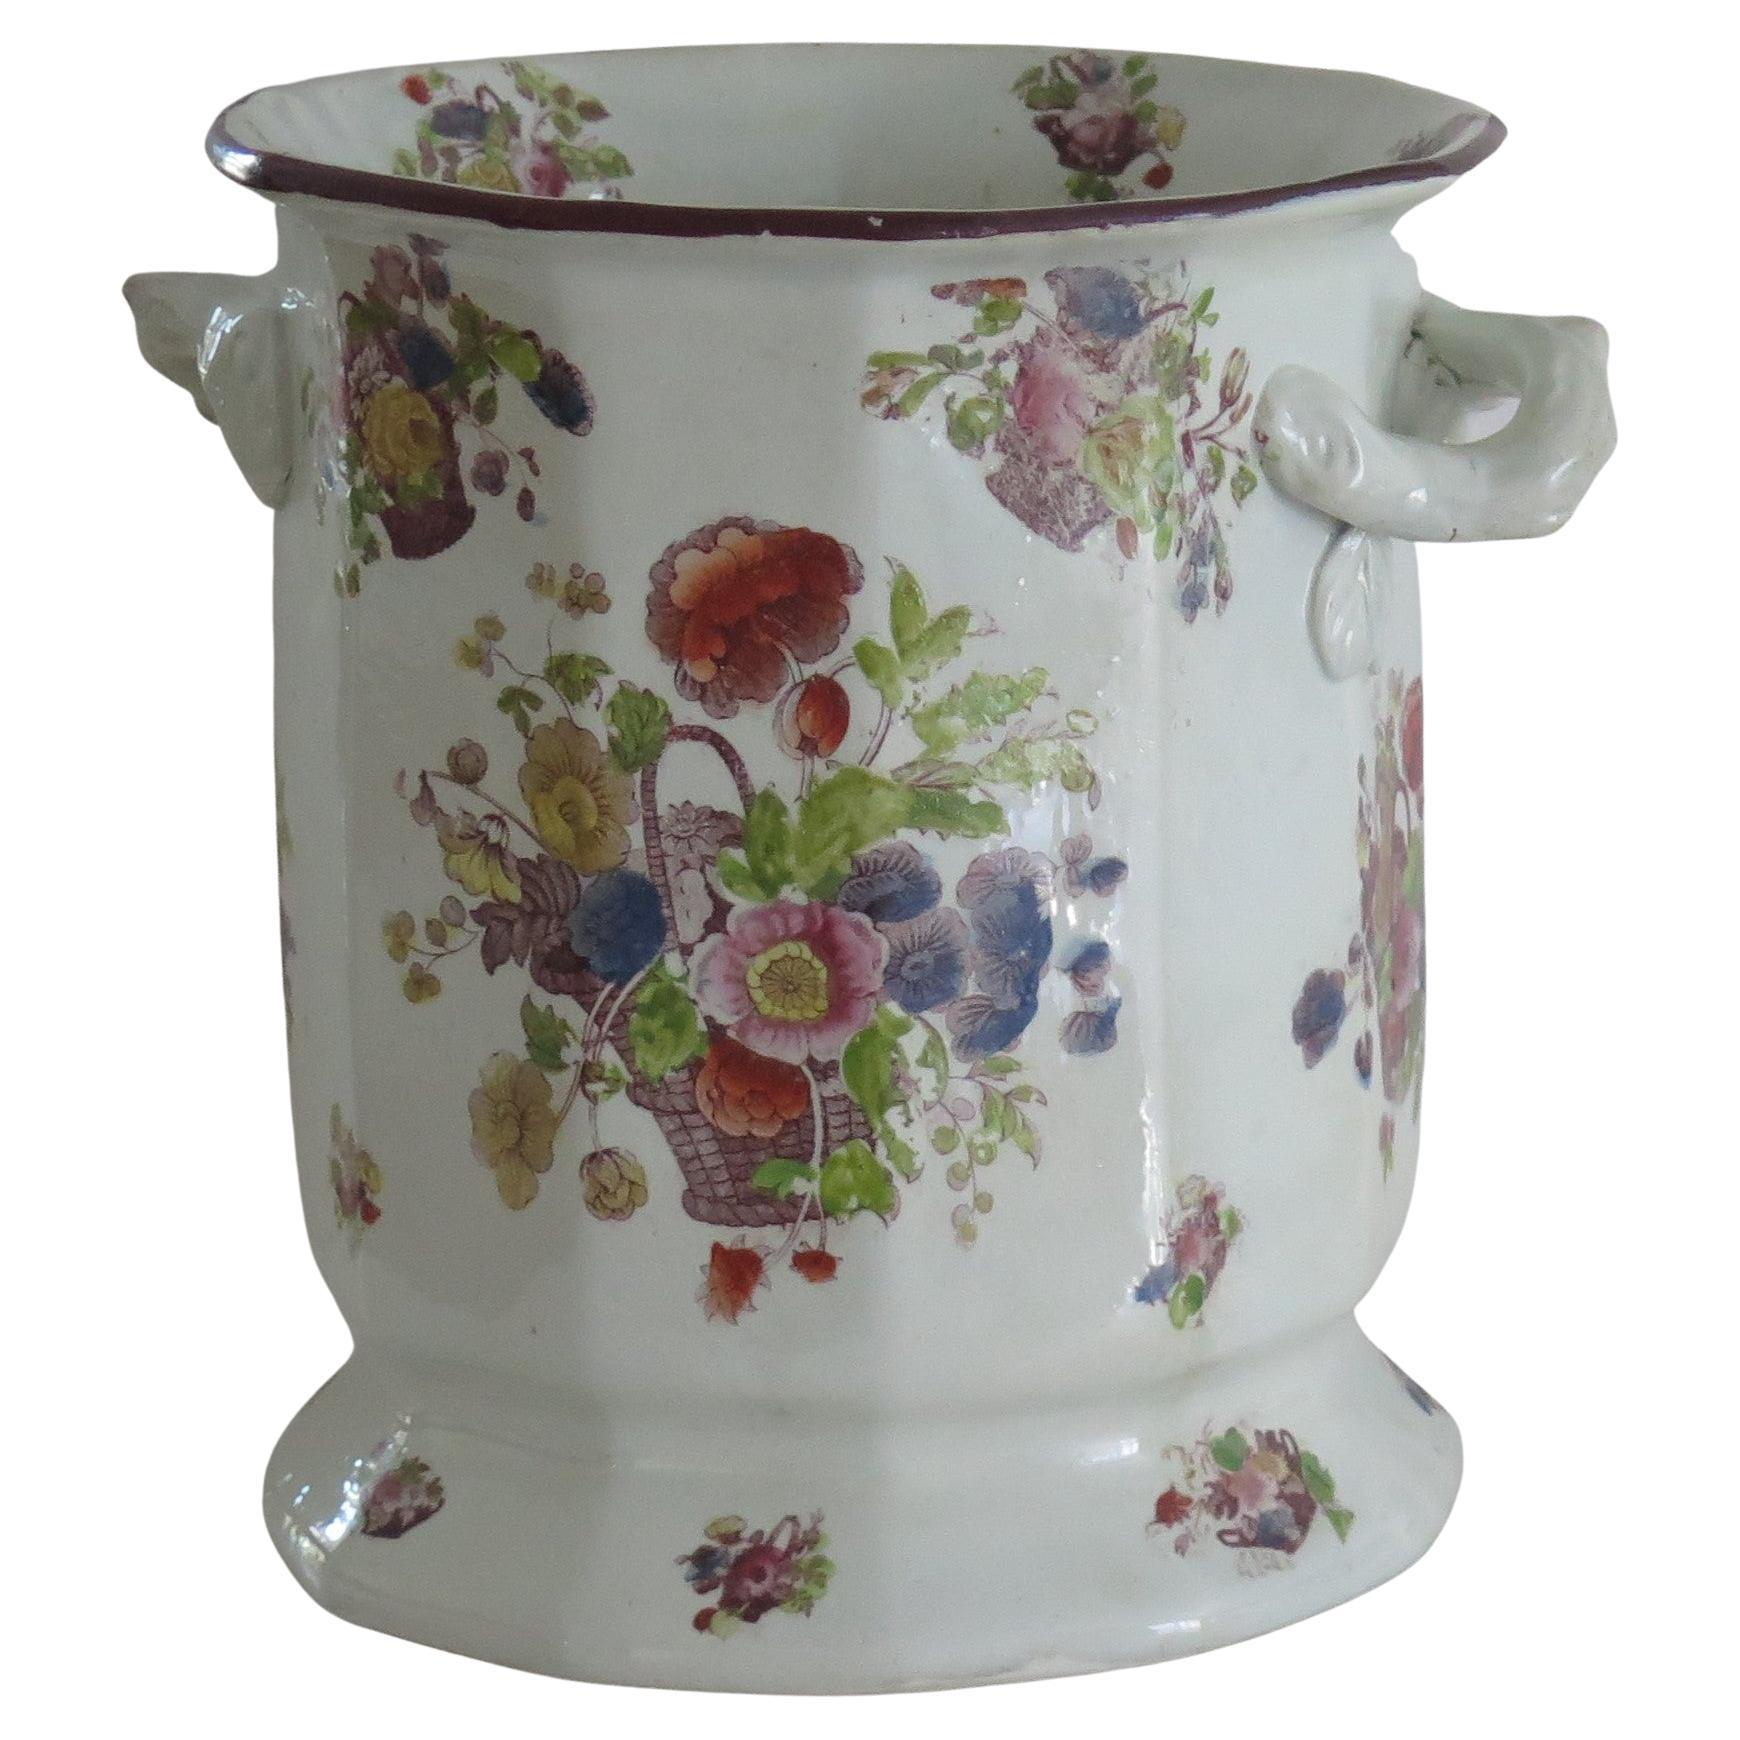 This is a very rare, ironstone Two Handled, Ice Pail or Wine Cooler Pot, made by Mason's Patent Ironstone China Company, of Lane Delph, Staffordshire, England, circa 1818. 

This piece is substantial and heavily potted, weighing about 2.2 Kg